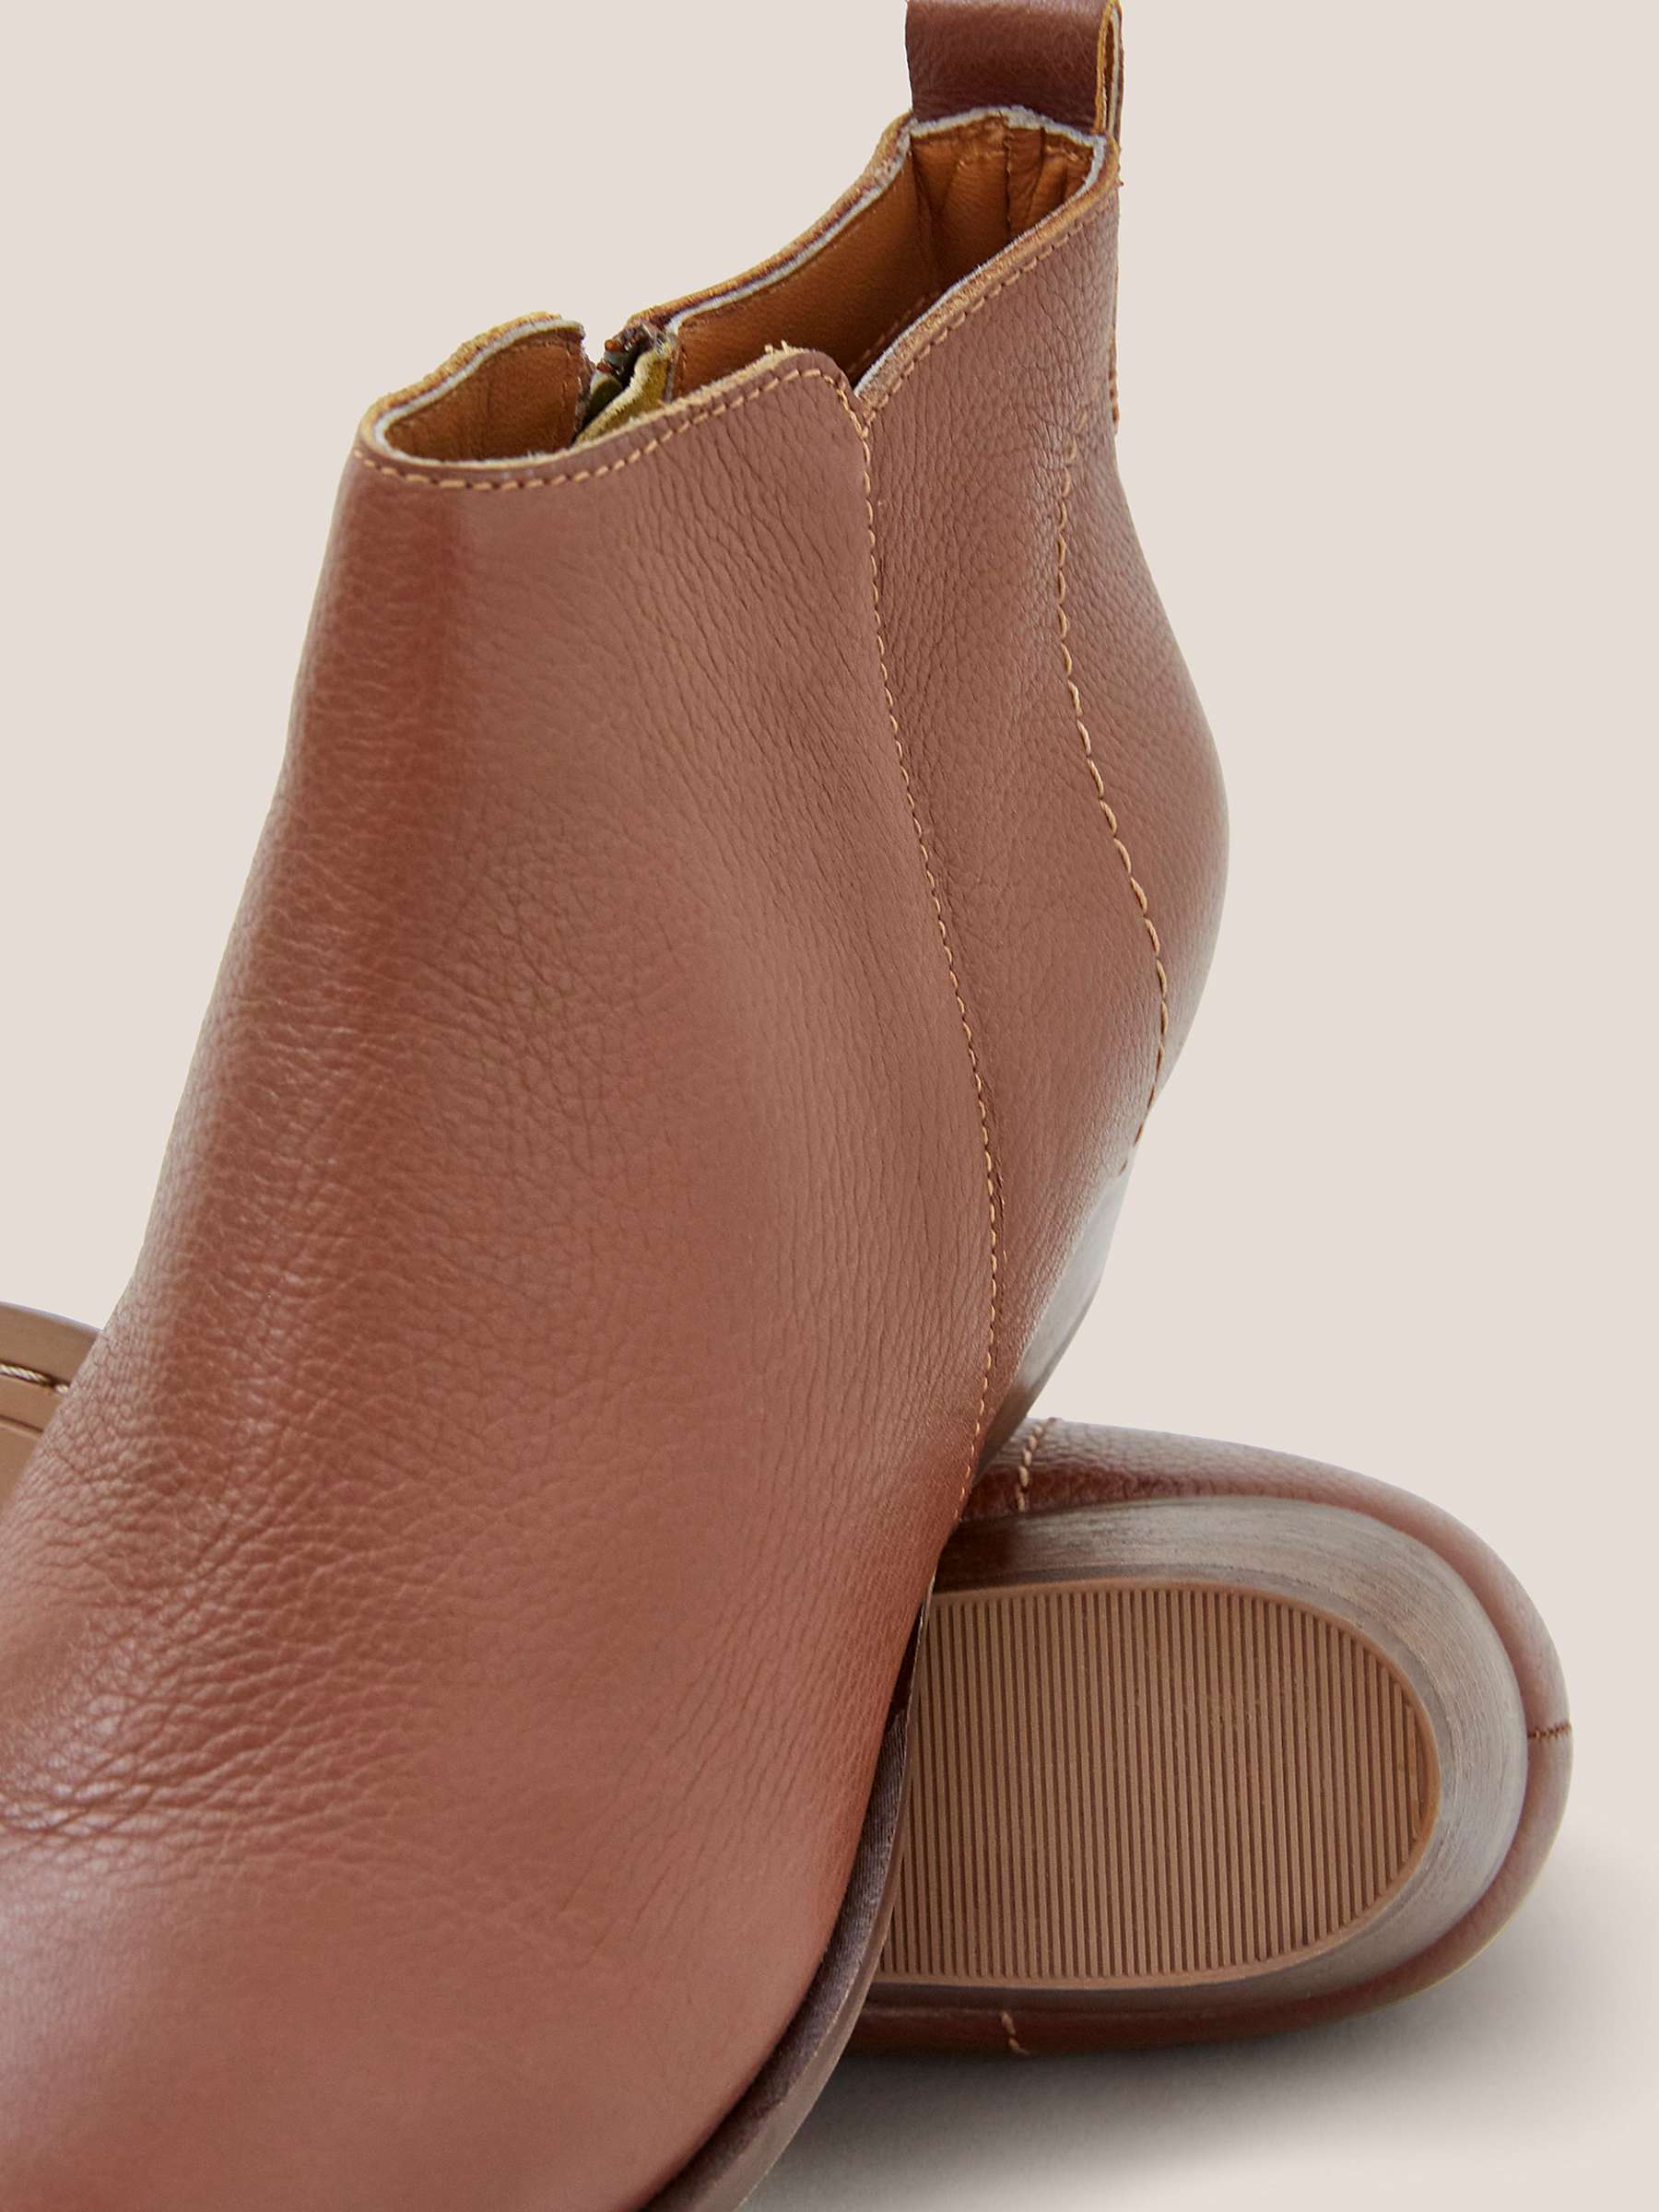 Buy White Stuff Leather Ankle Boots Online at johnlewis.com